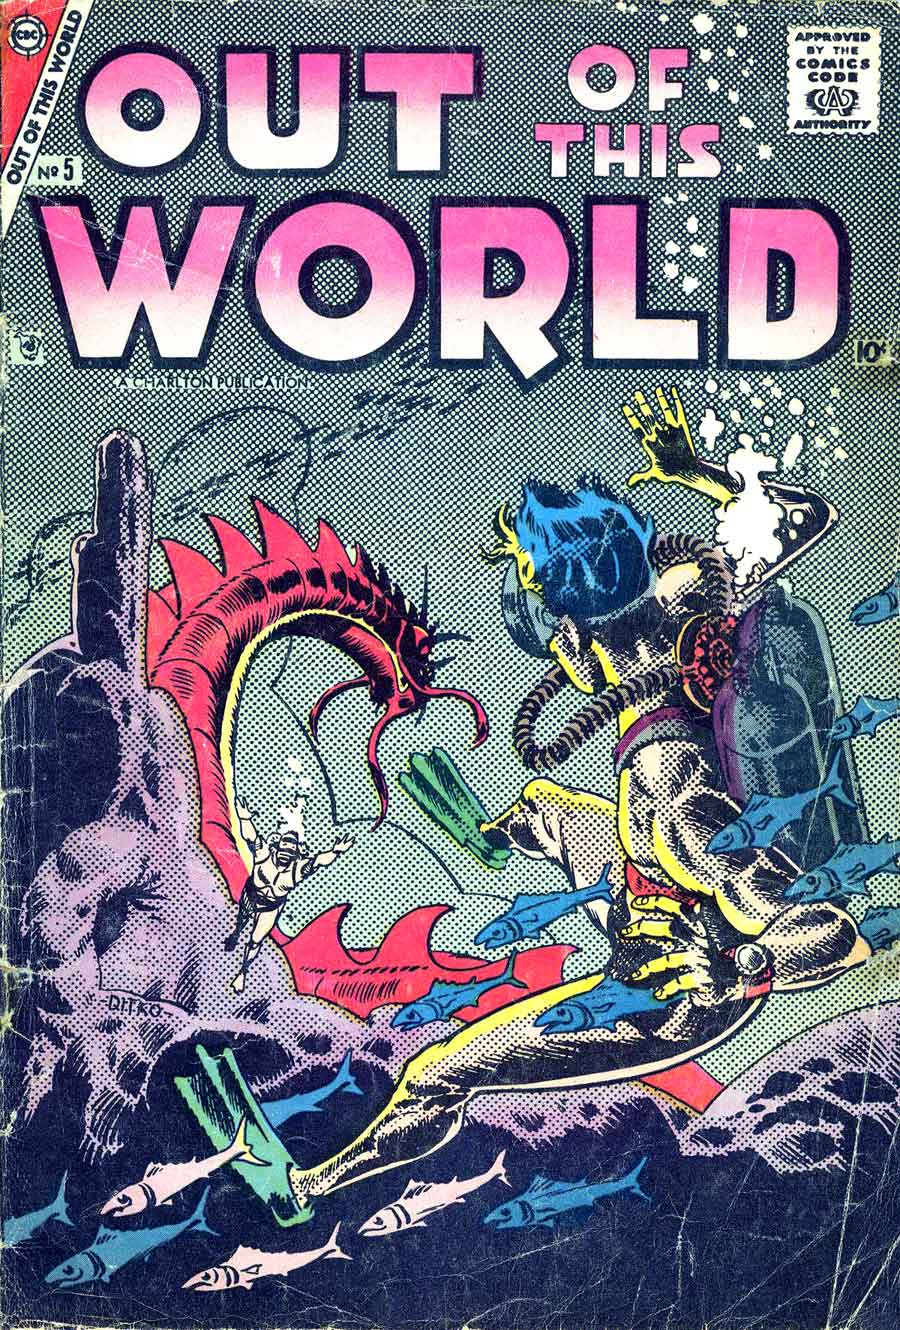 Out of This World v2 #5 charlton golden age comic book cover art by Steve Ditko